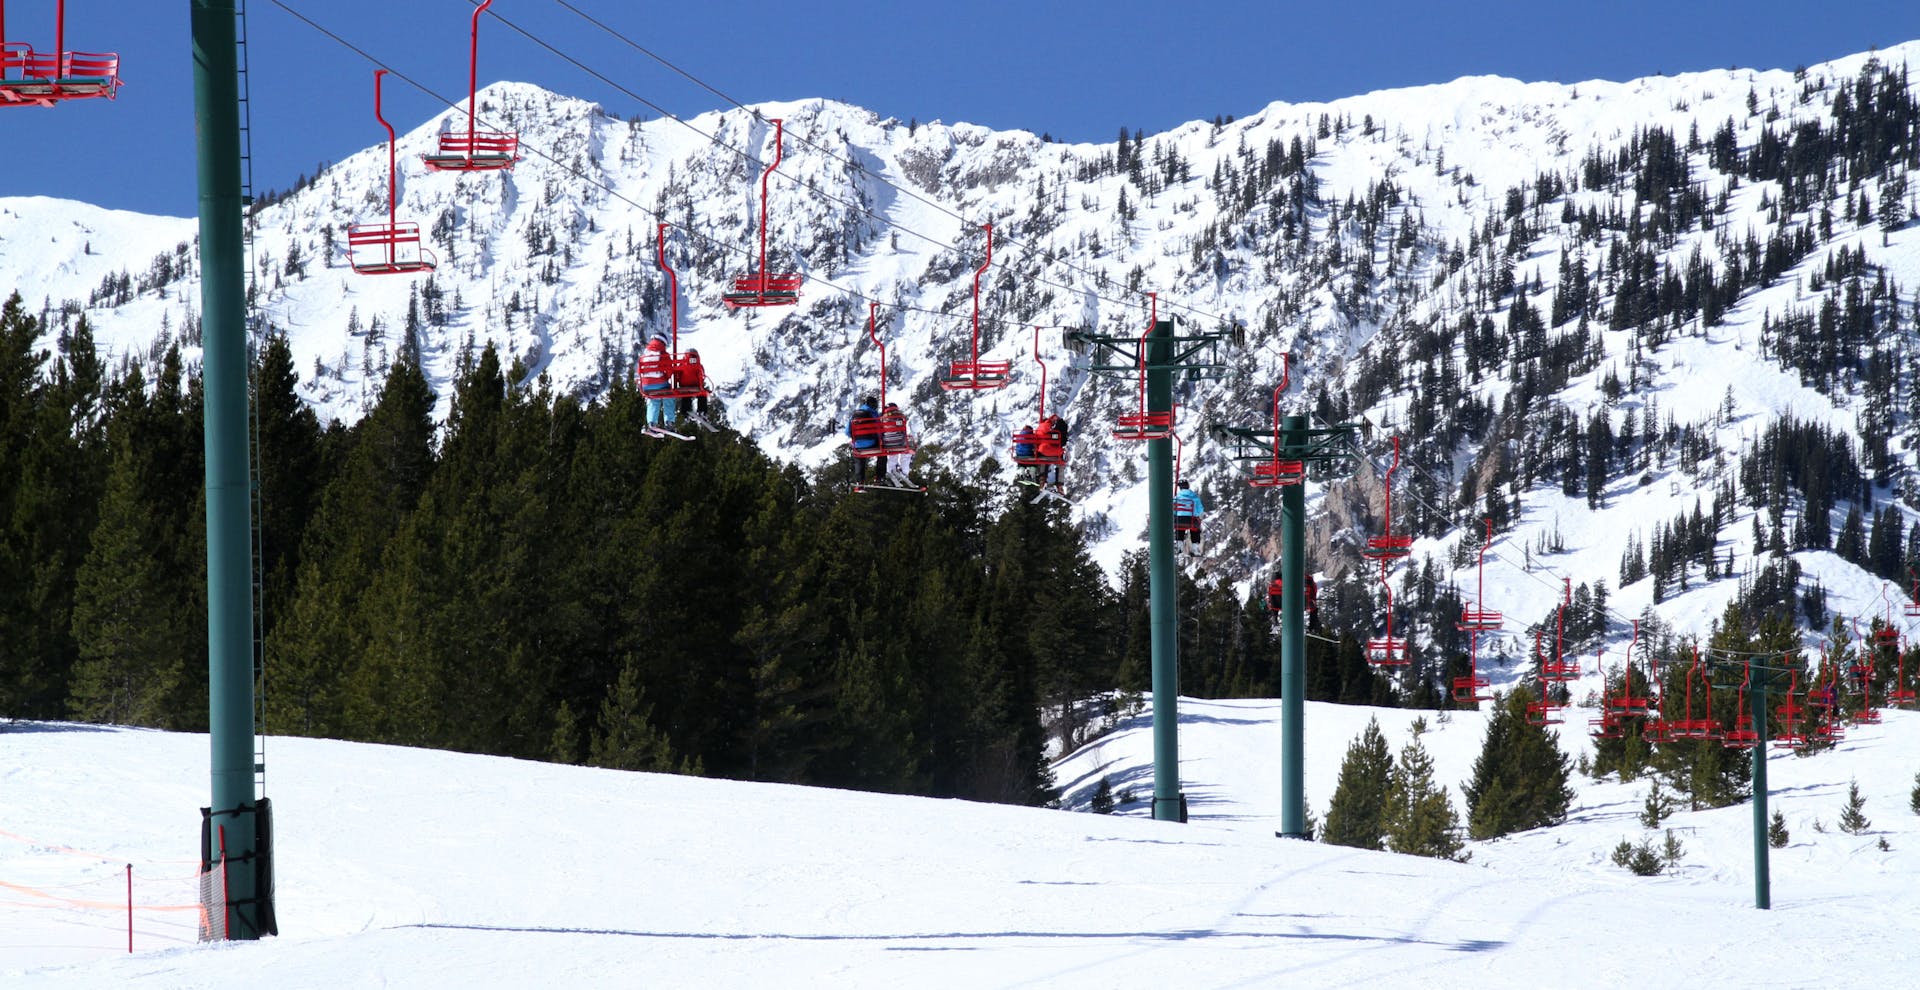 Red chairlifts at Bridger Bowl